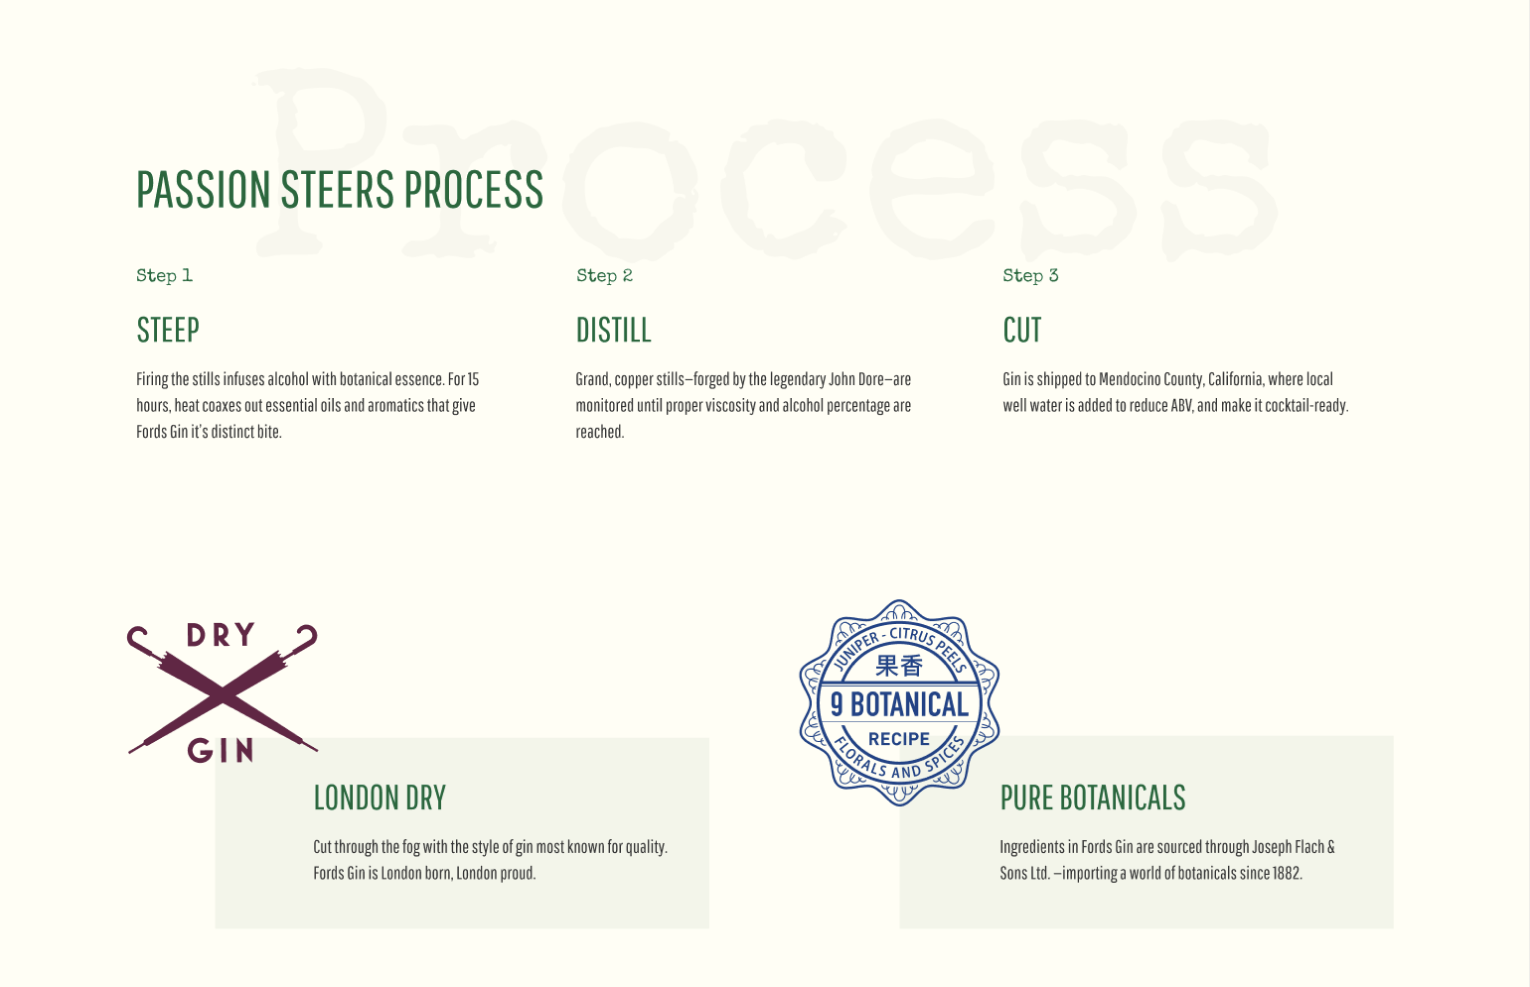 Screengrab showing the process of making Fords Gin described in three steps